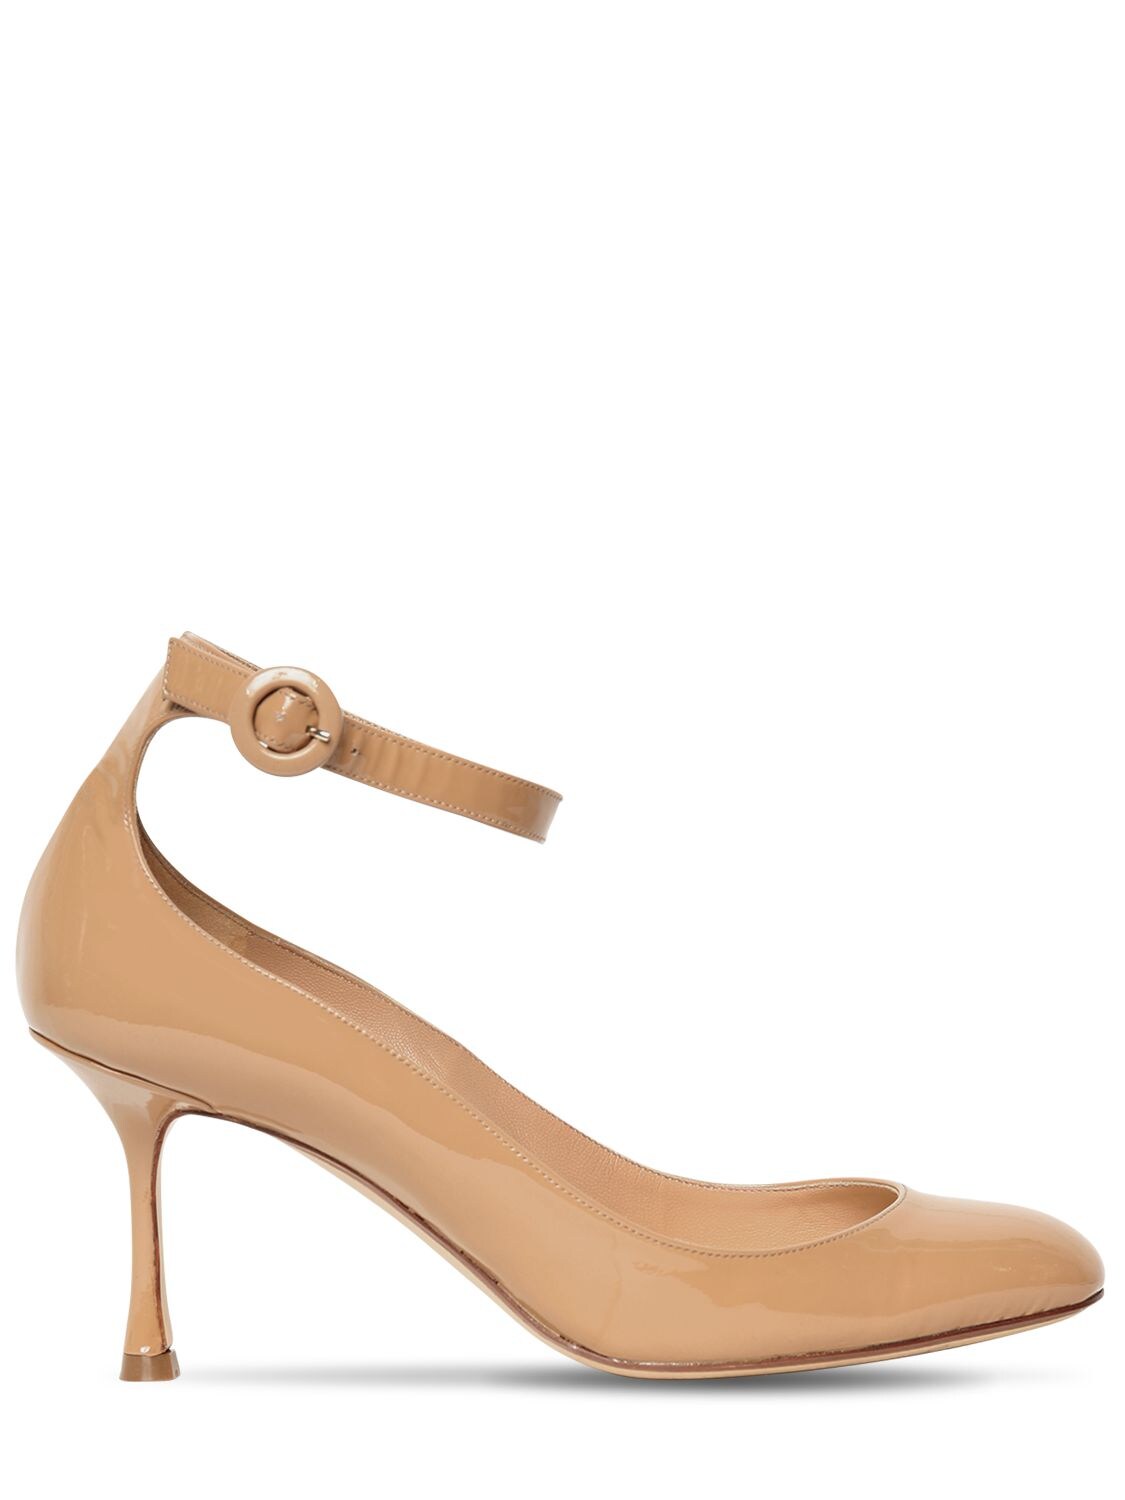 Francesco Russo 75mm Patent Leather Pumps In Beige | ModeSens